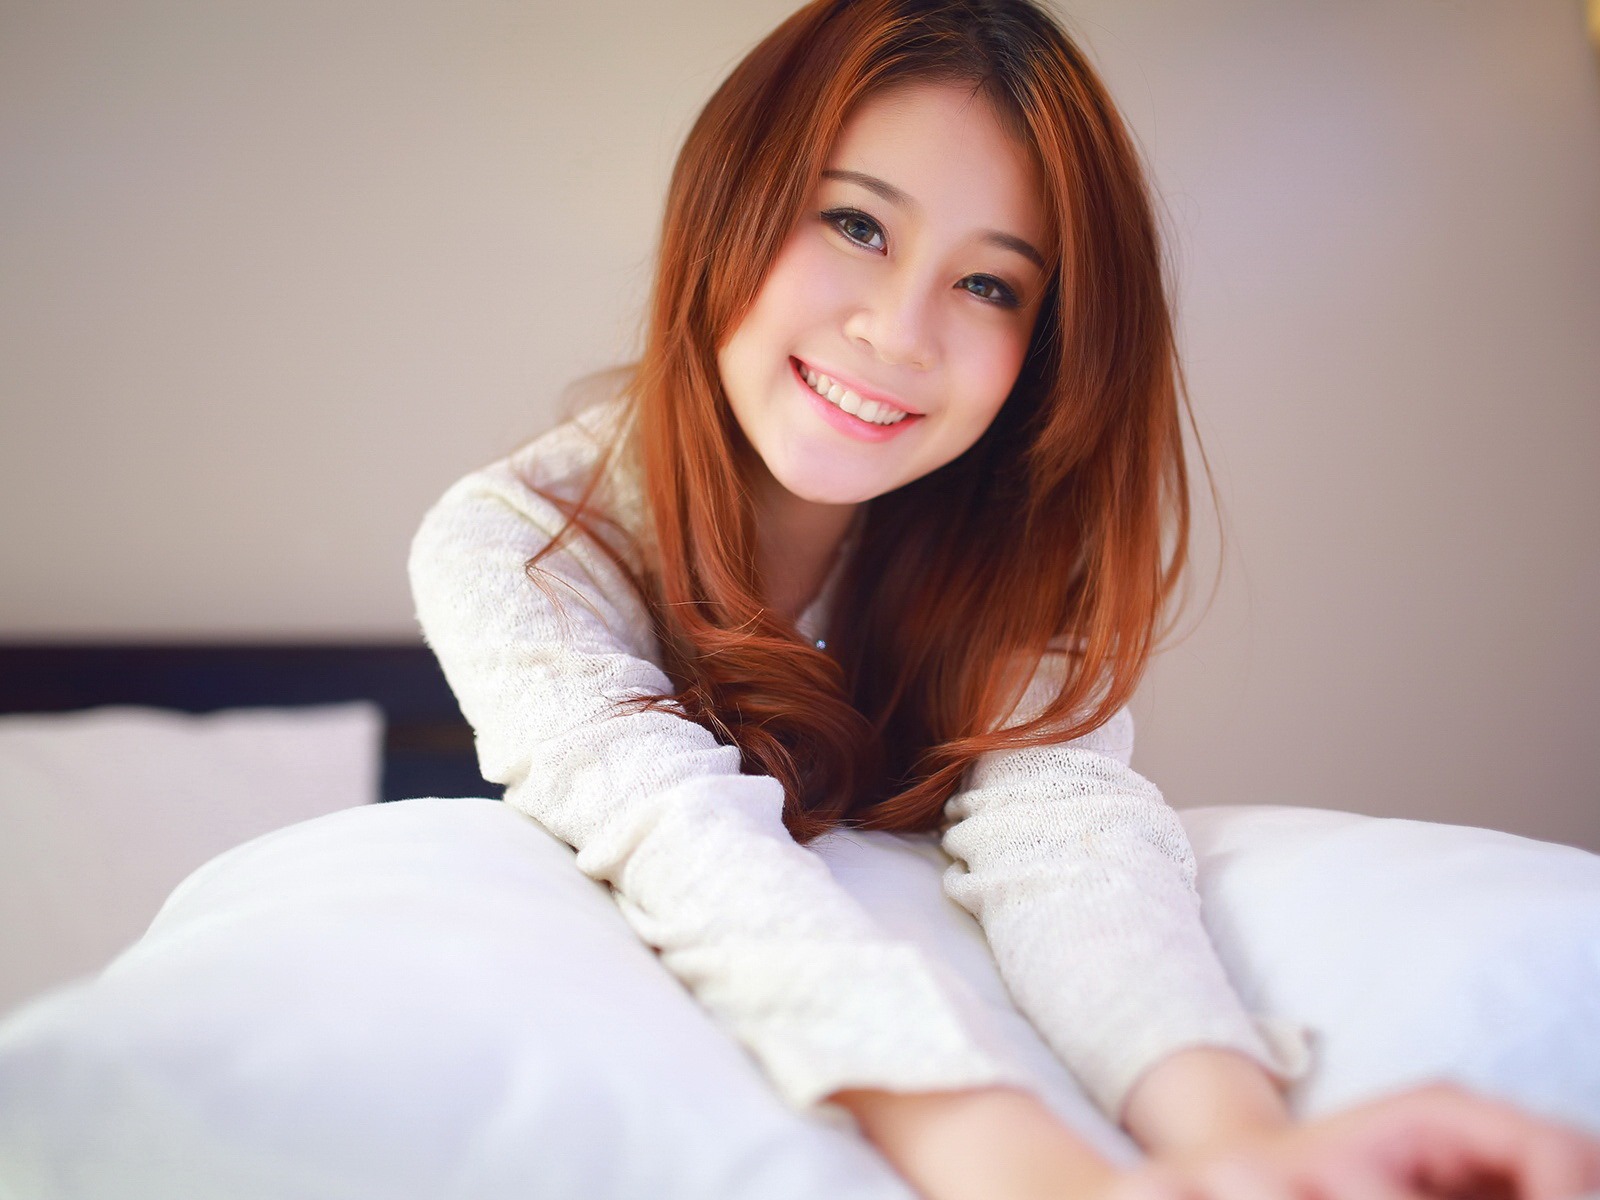 Pure and lovely young Asian girl HD wallpapers collection (4) #14 - 1600x1200